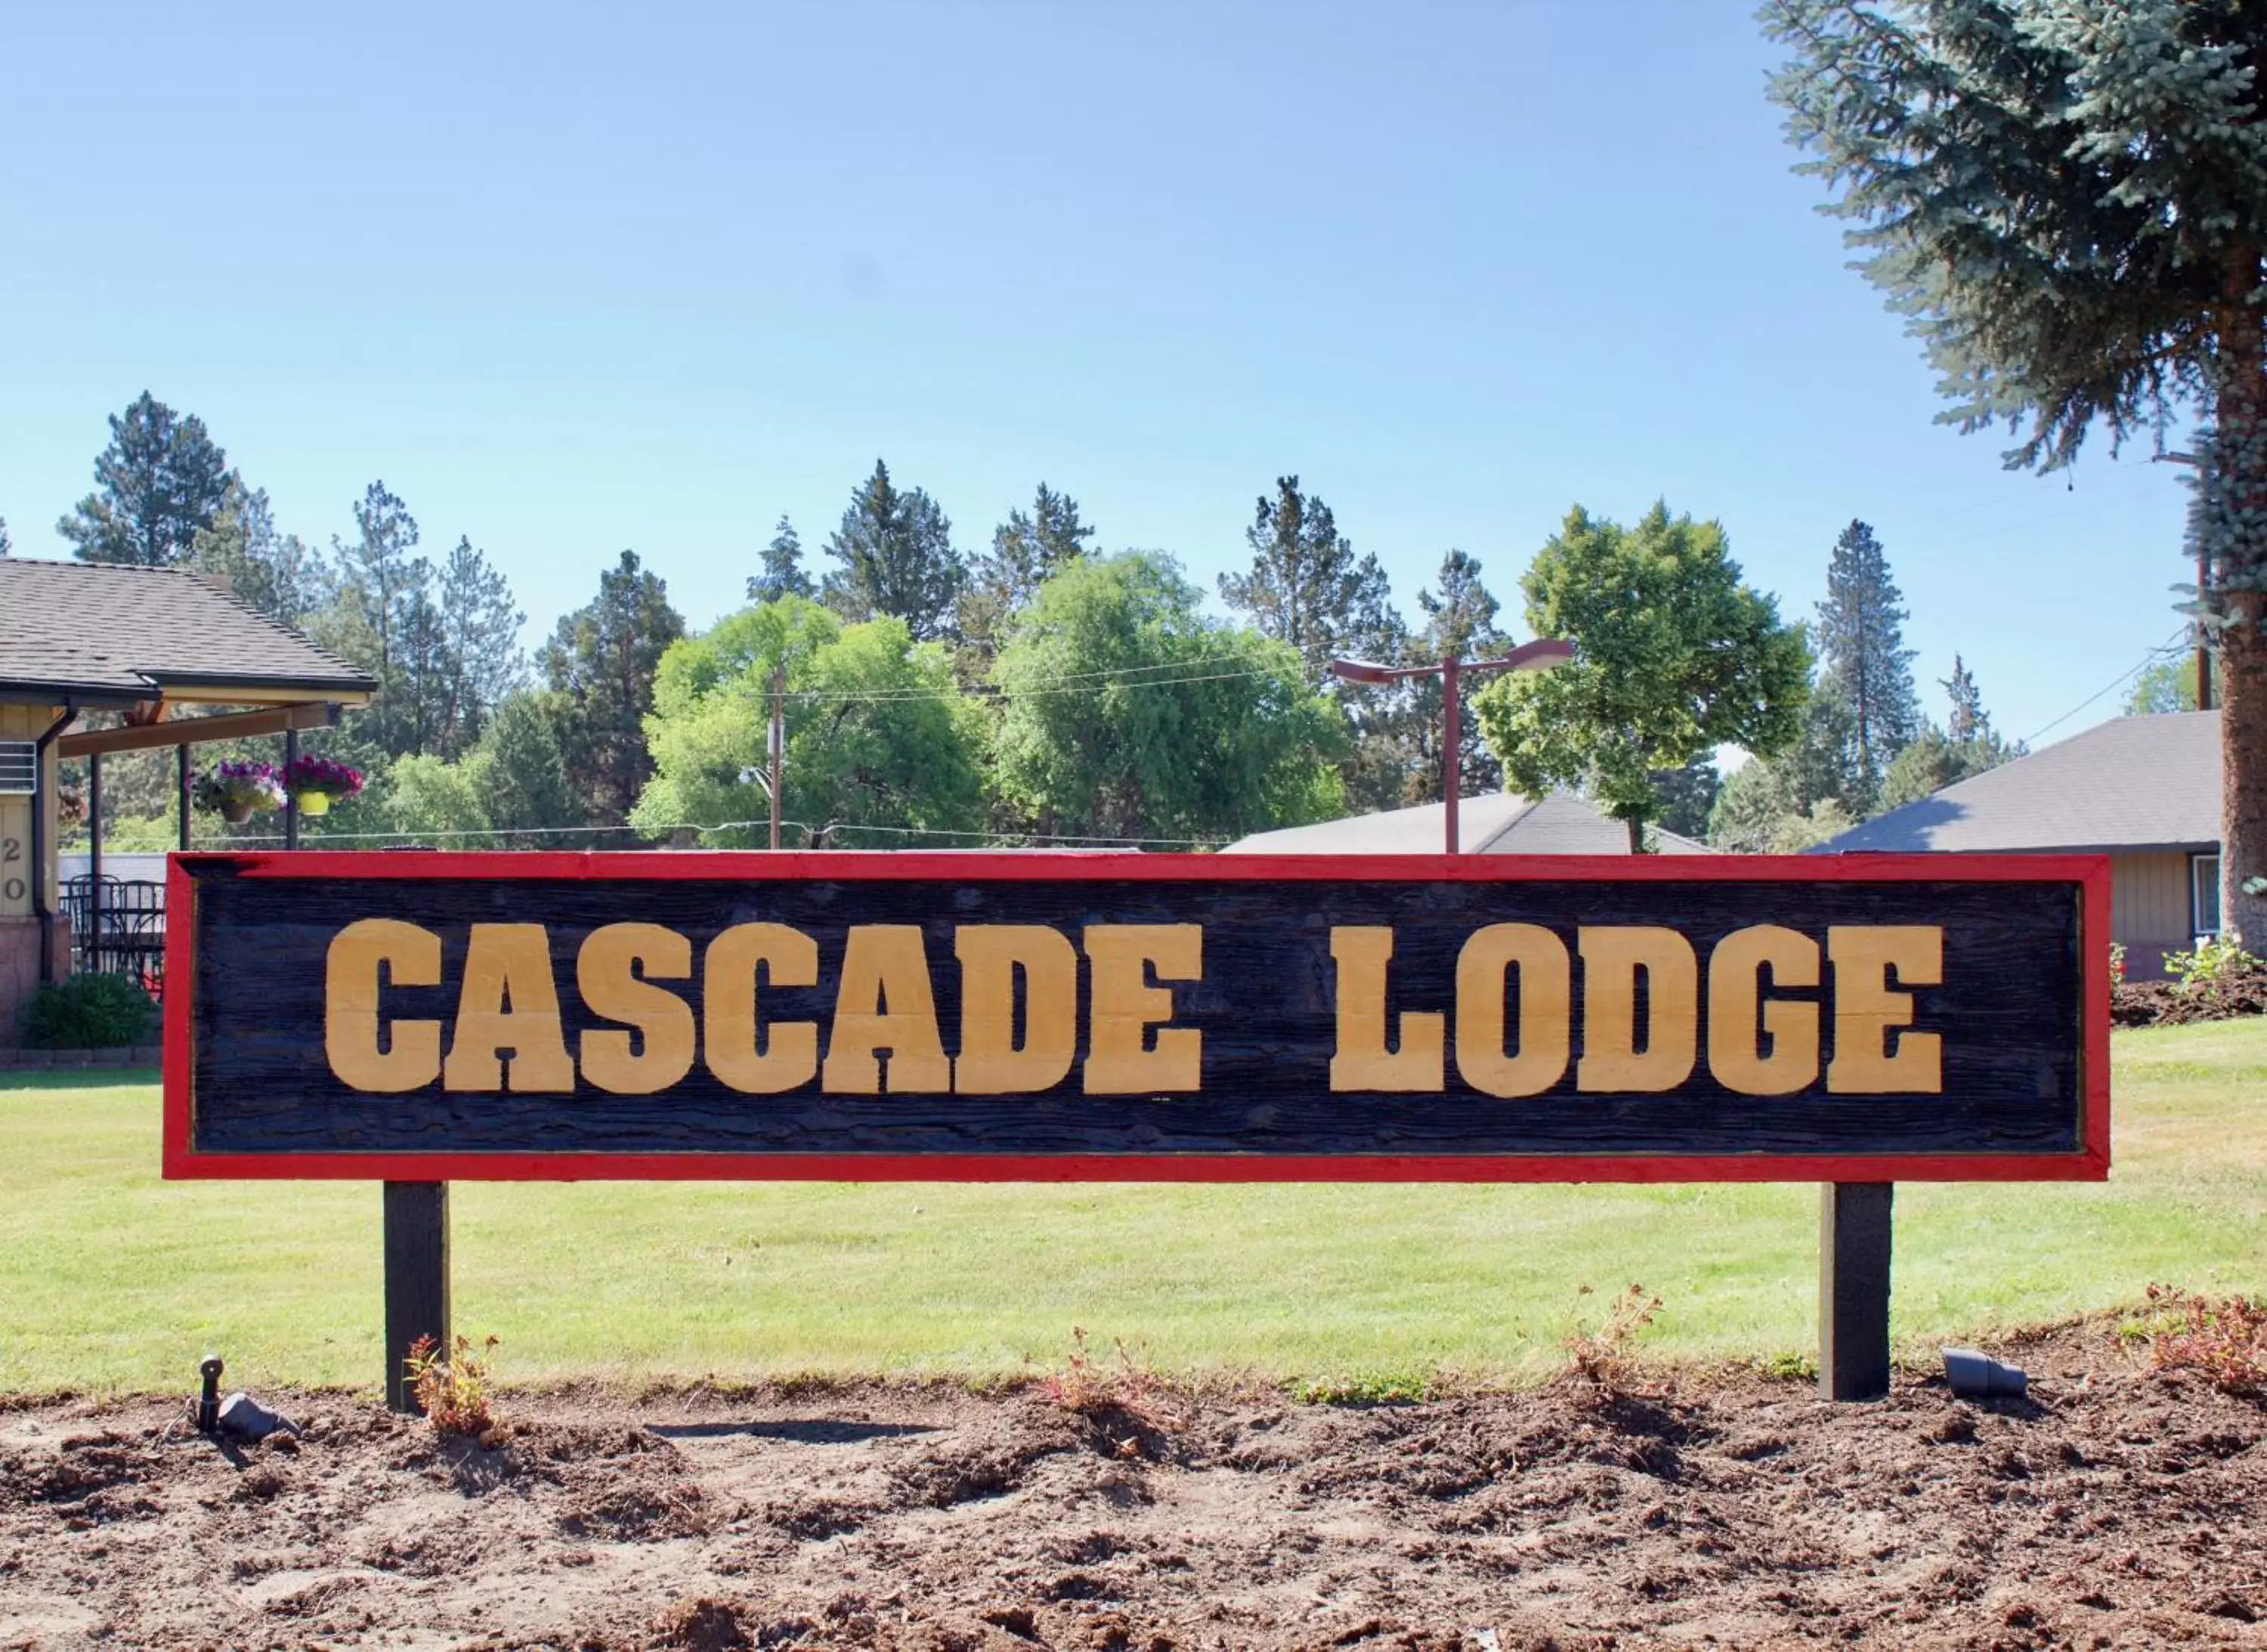 Property logo or sign in Cascade Lodge